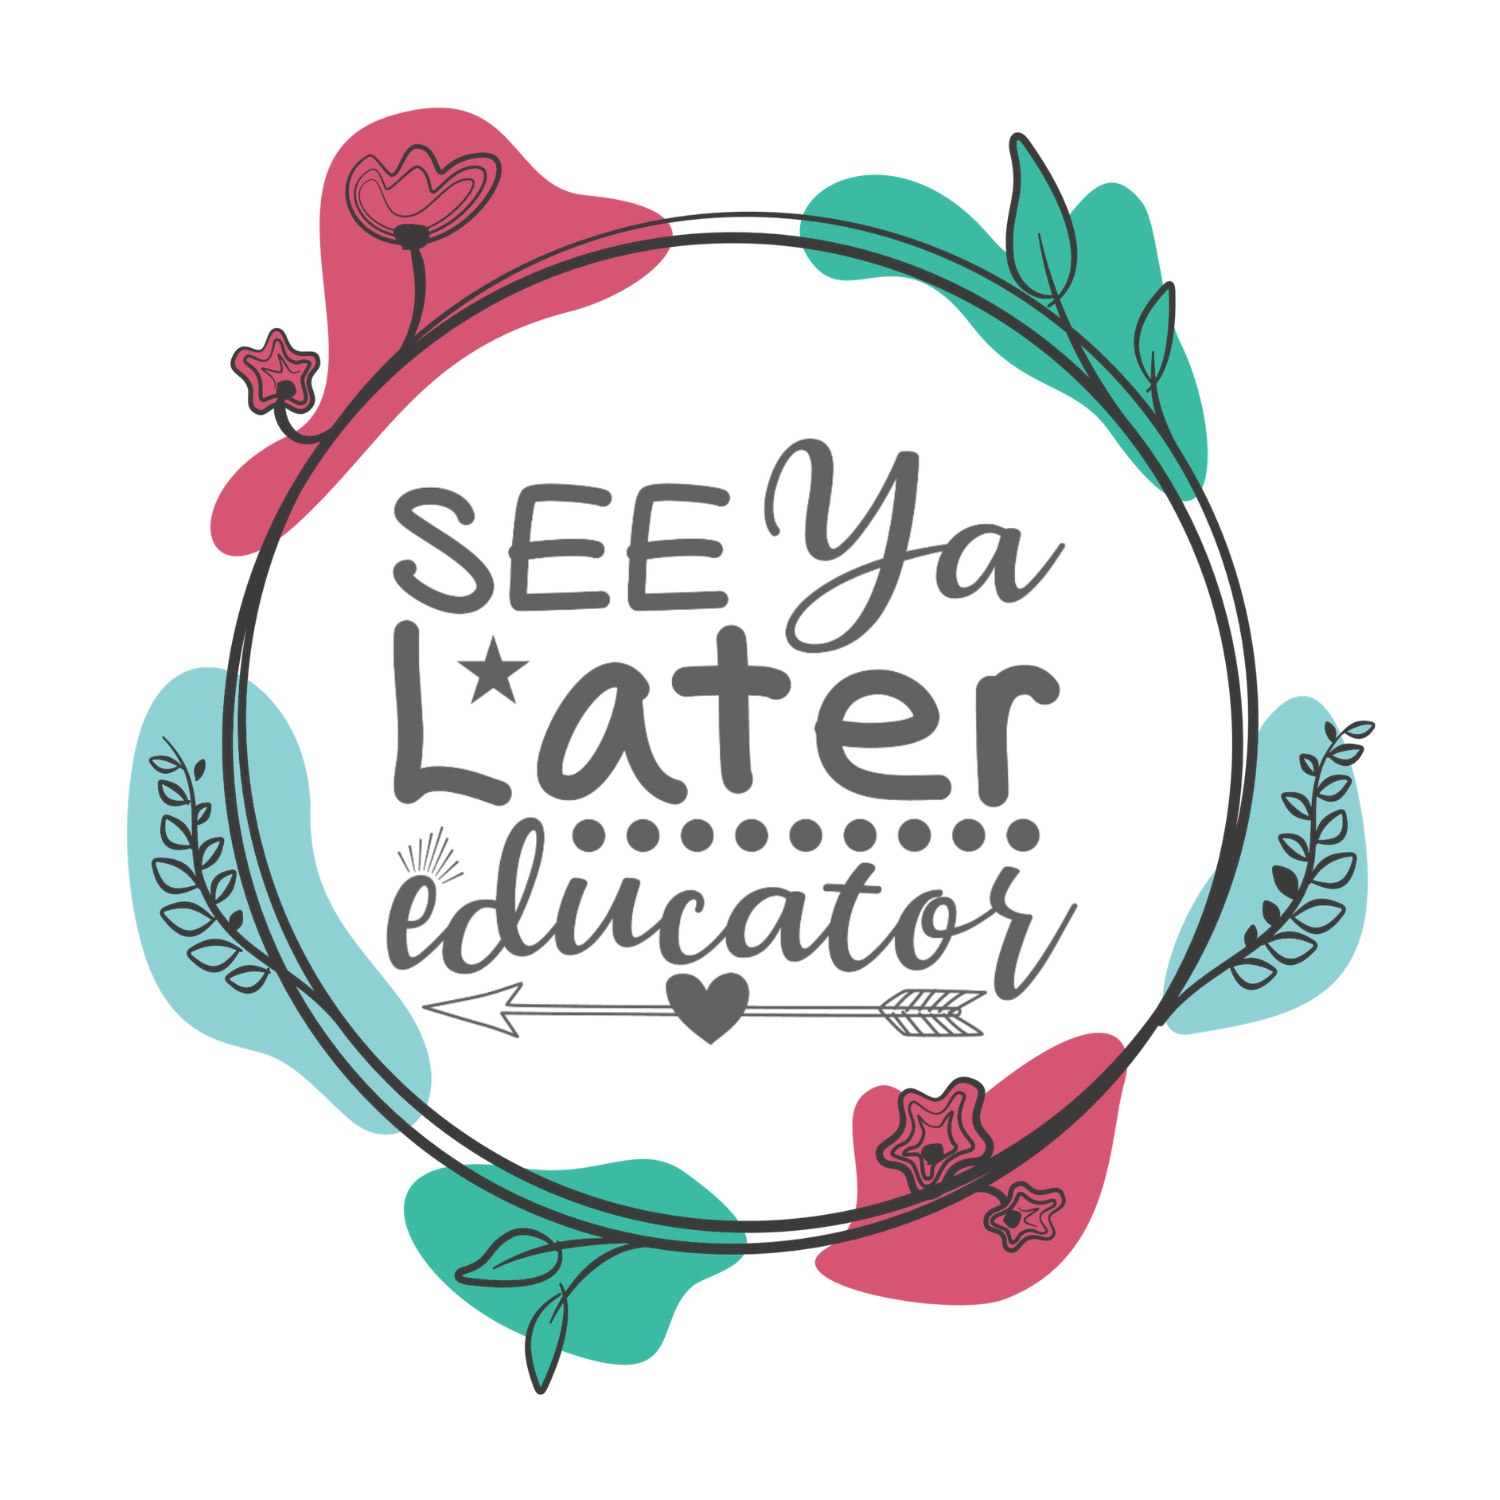 See Ya Later Educator 2 SVG | Digital Download | Cut File | SVG - Only The Sweet Stuff